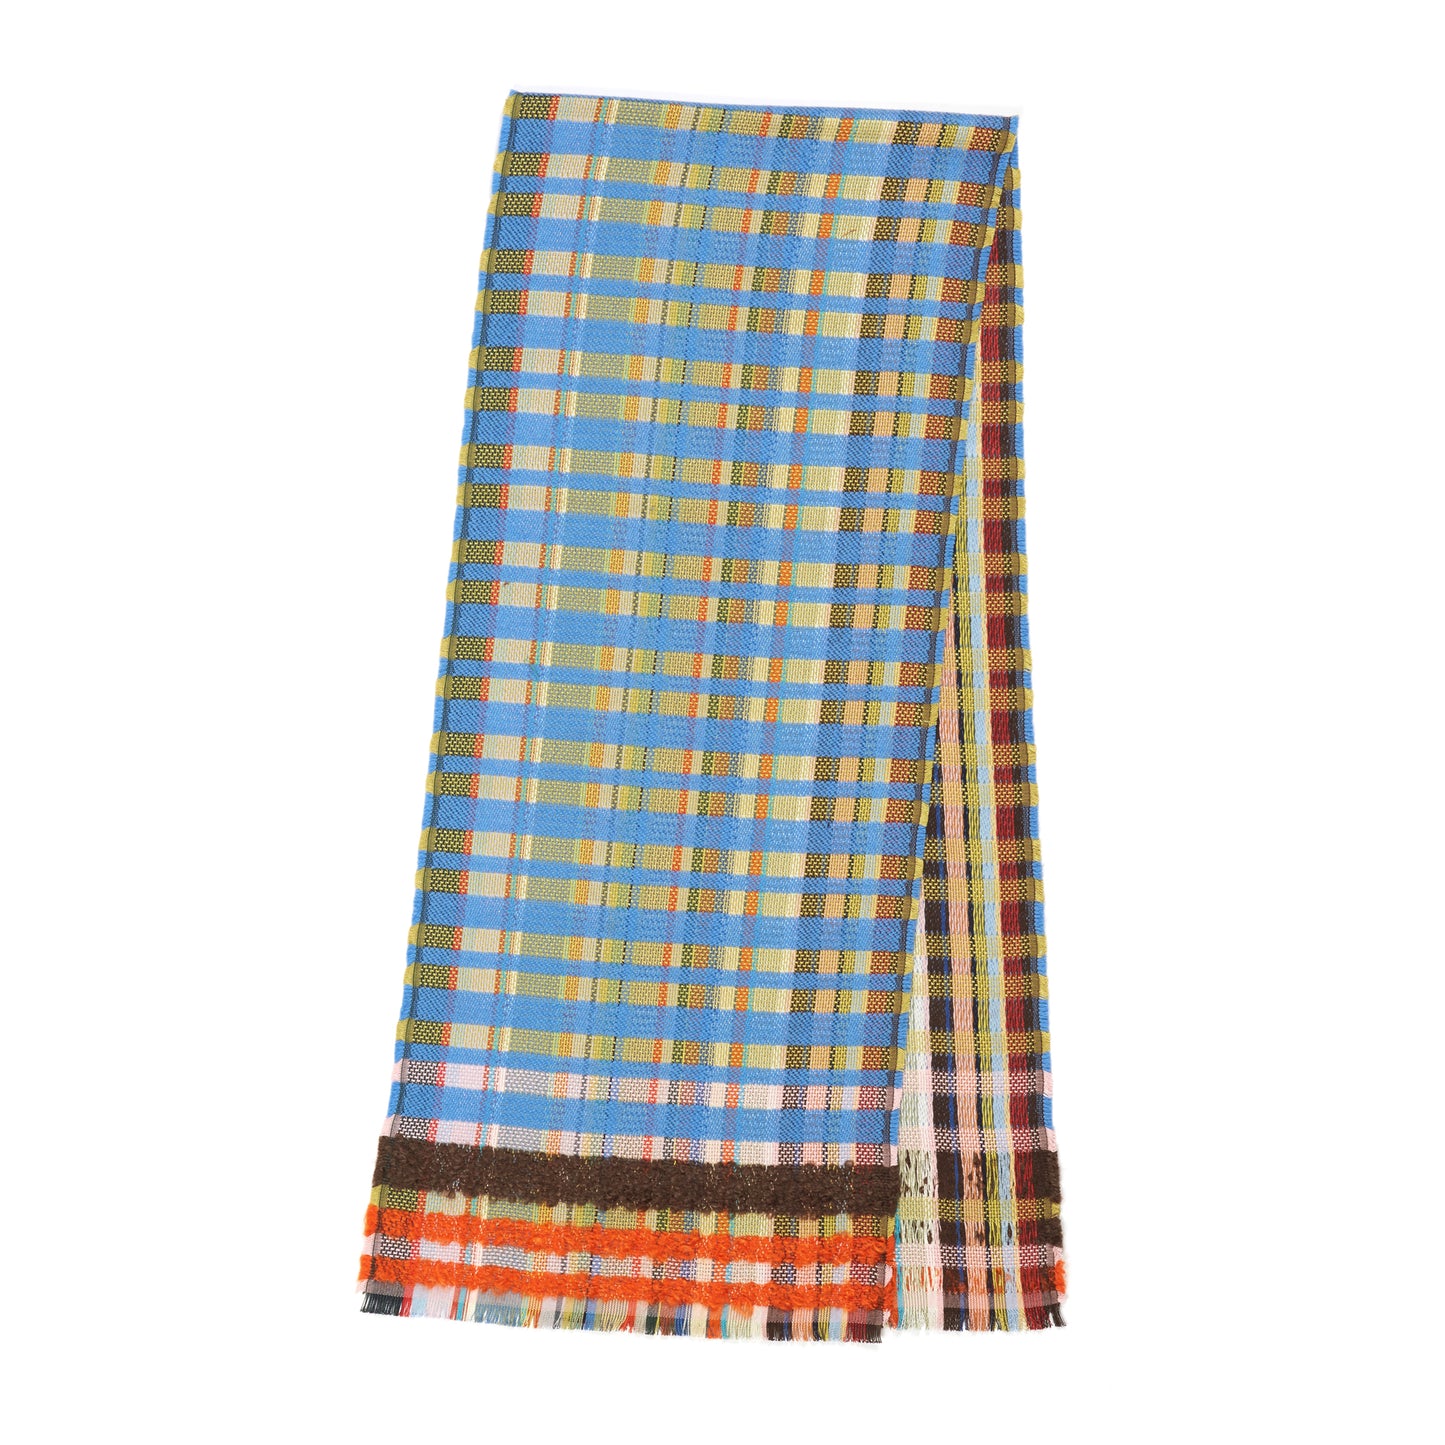 WALLACE+SEWELL - SILK+CASHMERE SCARF - GIOVANNI - BLUE